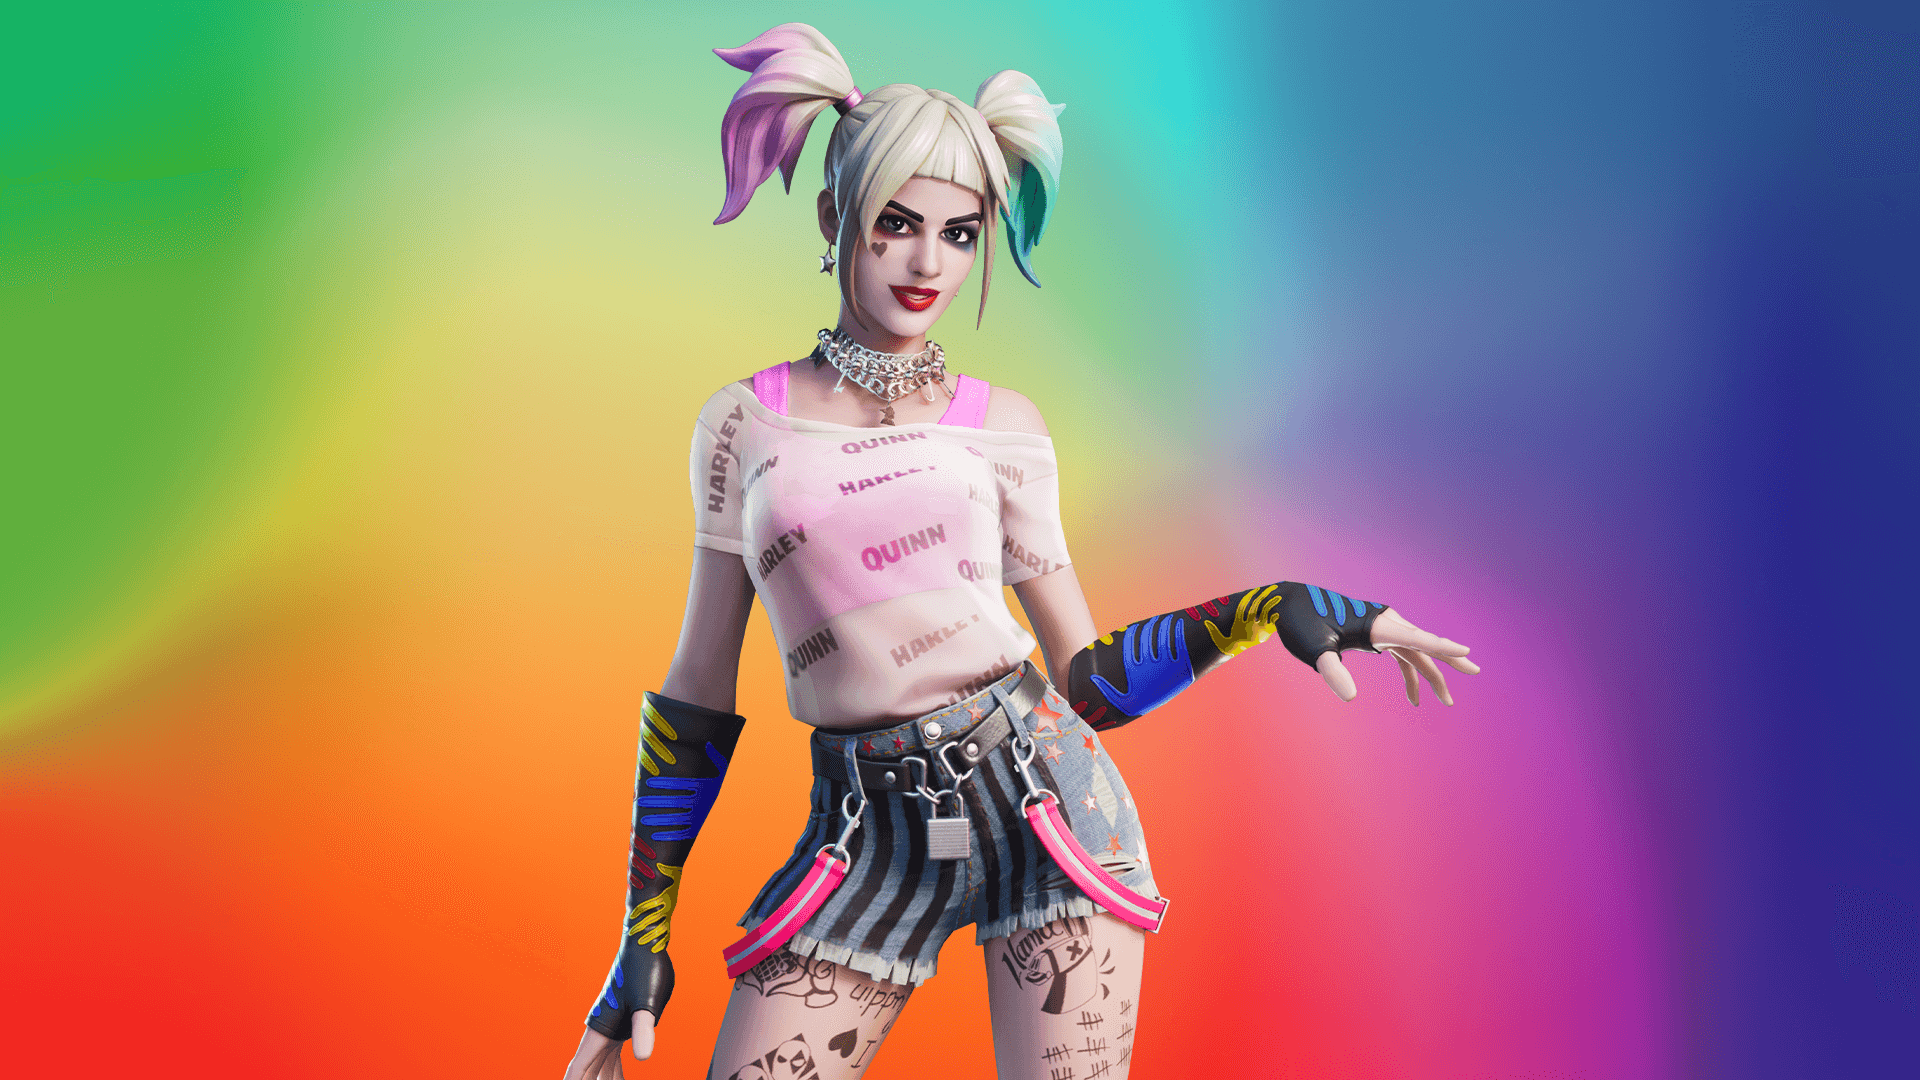 Epic Games Officially Announces Harley Quinn is Coming to ... - 1920 x 1080 png 432kB